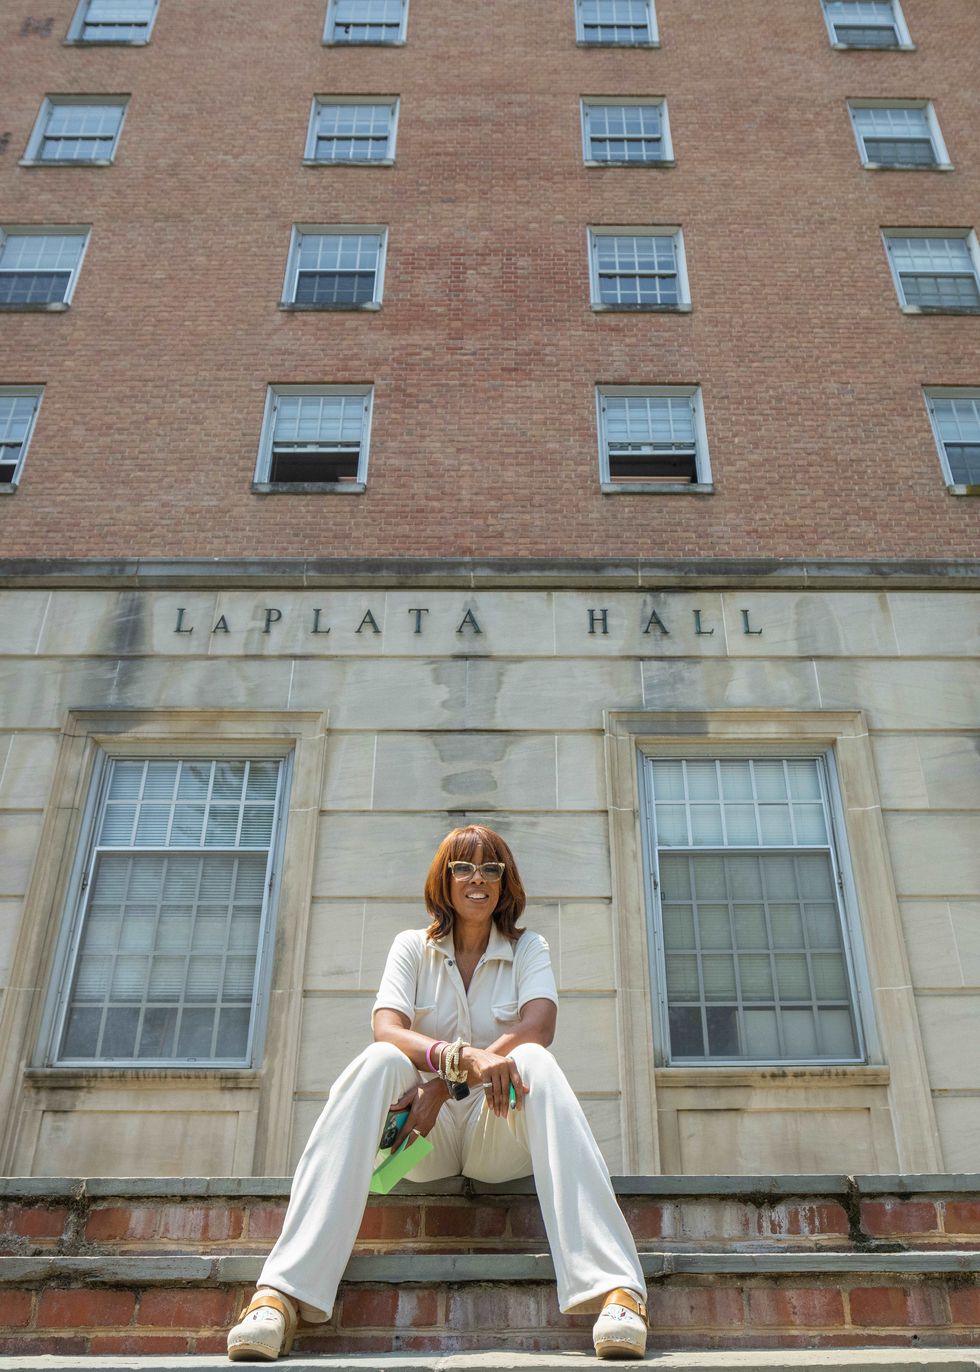 gayle king pre commencement tours, interviews and activities on campus prior to the main ceremony